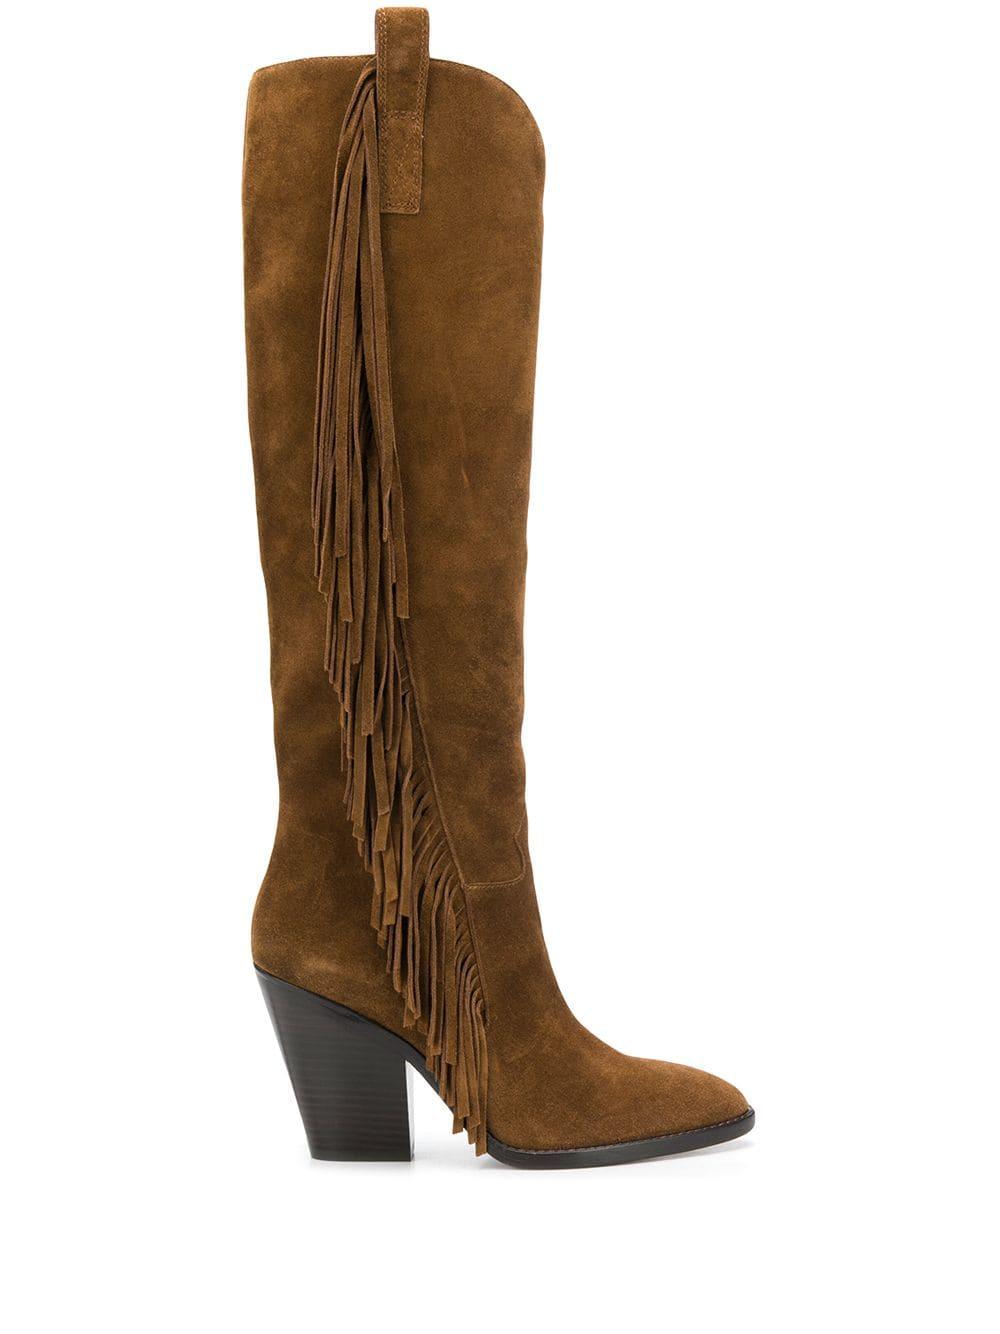 Ash Elodie Fringed Boots in Brown | Lyst